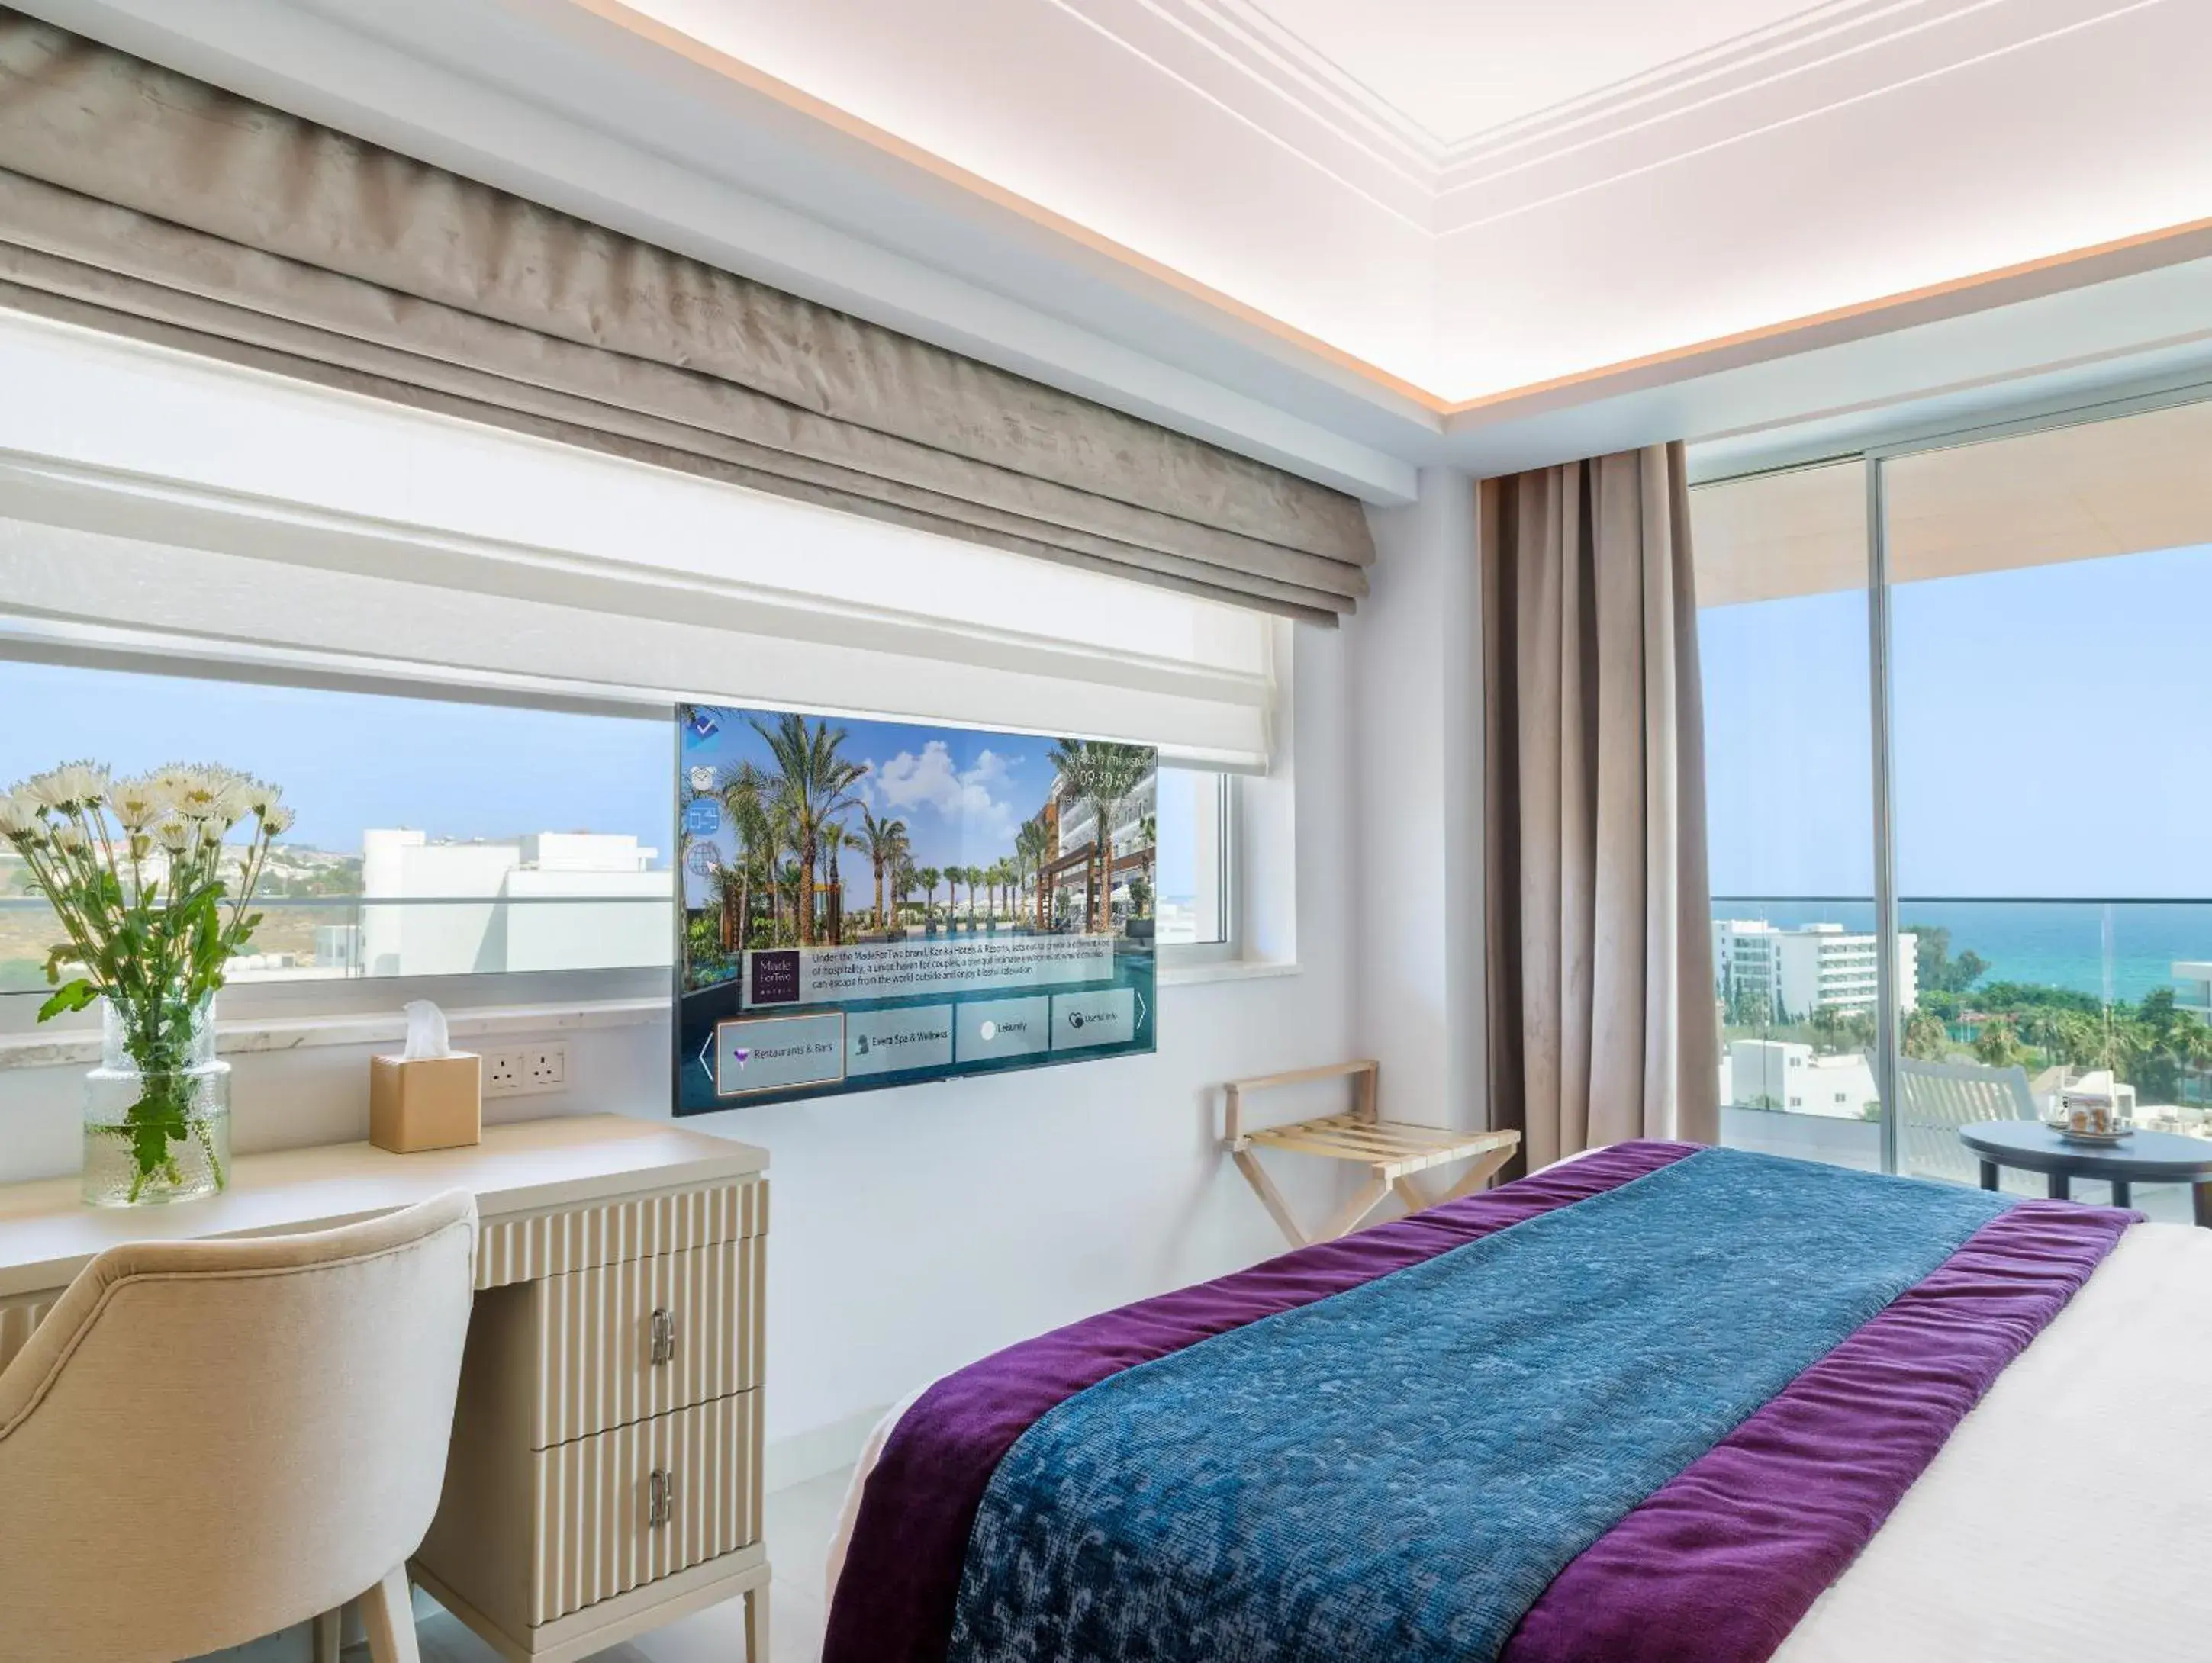 View (from property/room) in Amanti, MadeForTwo Hotels - Ayia Napa